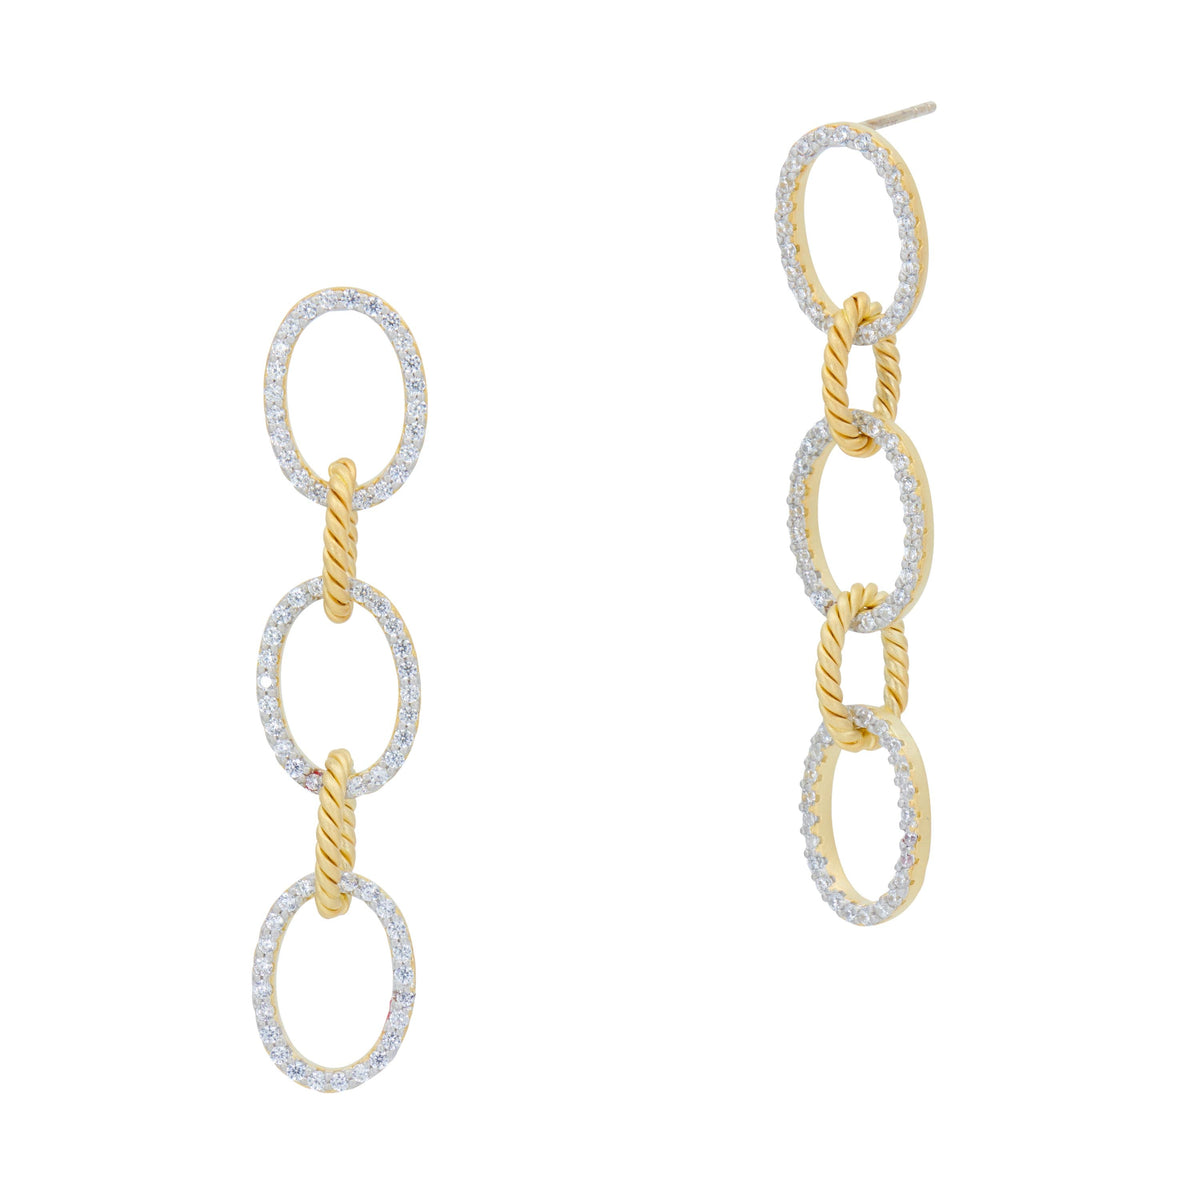 BRIGHT SKY CHAIN LINK EARRING